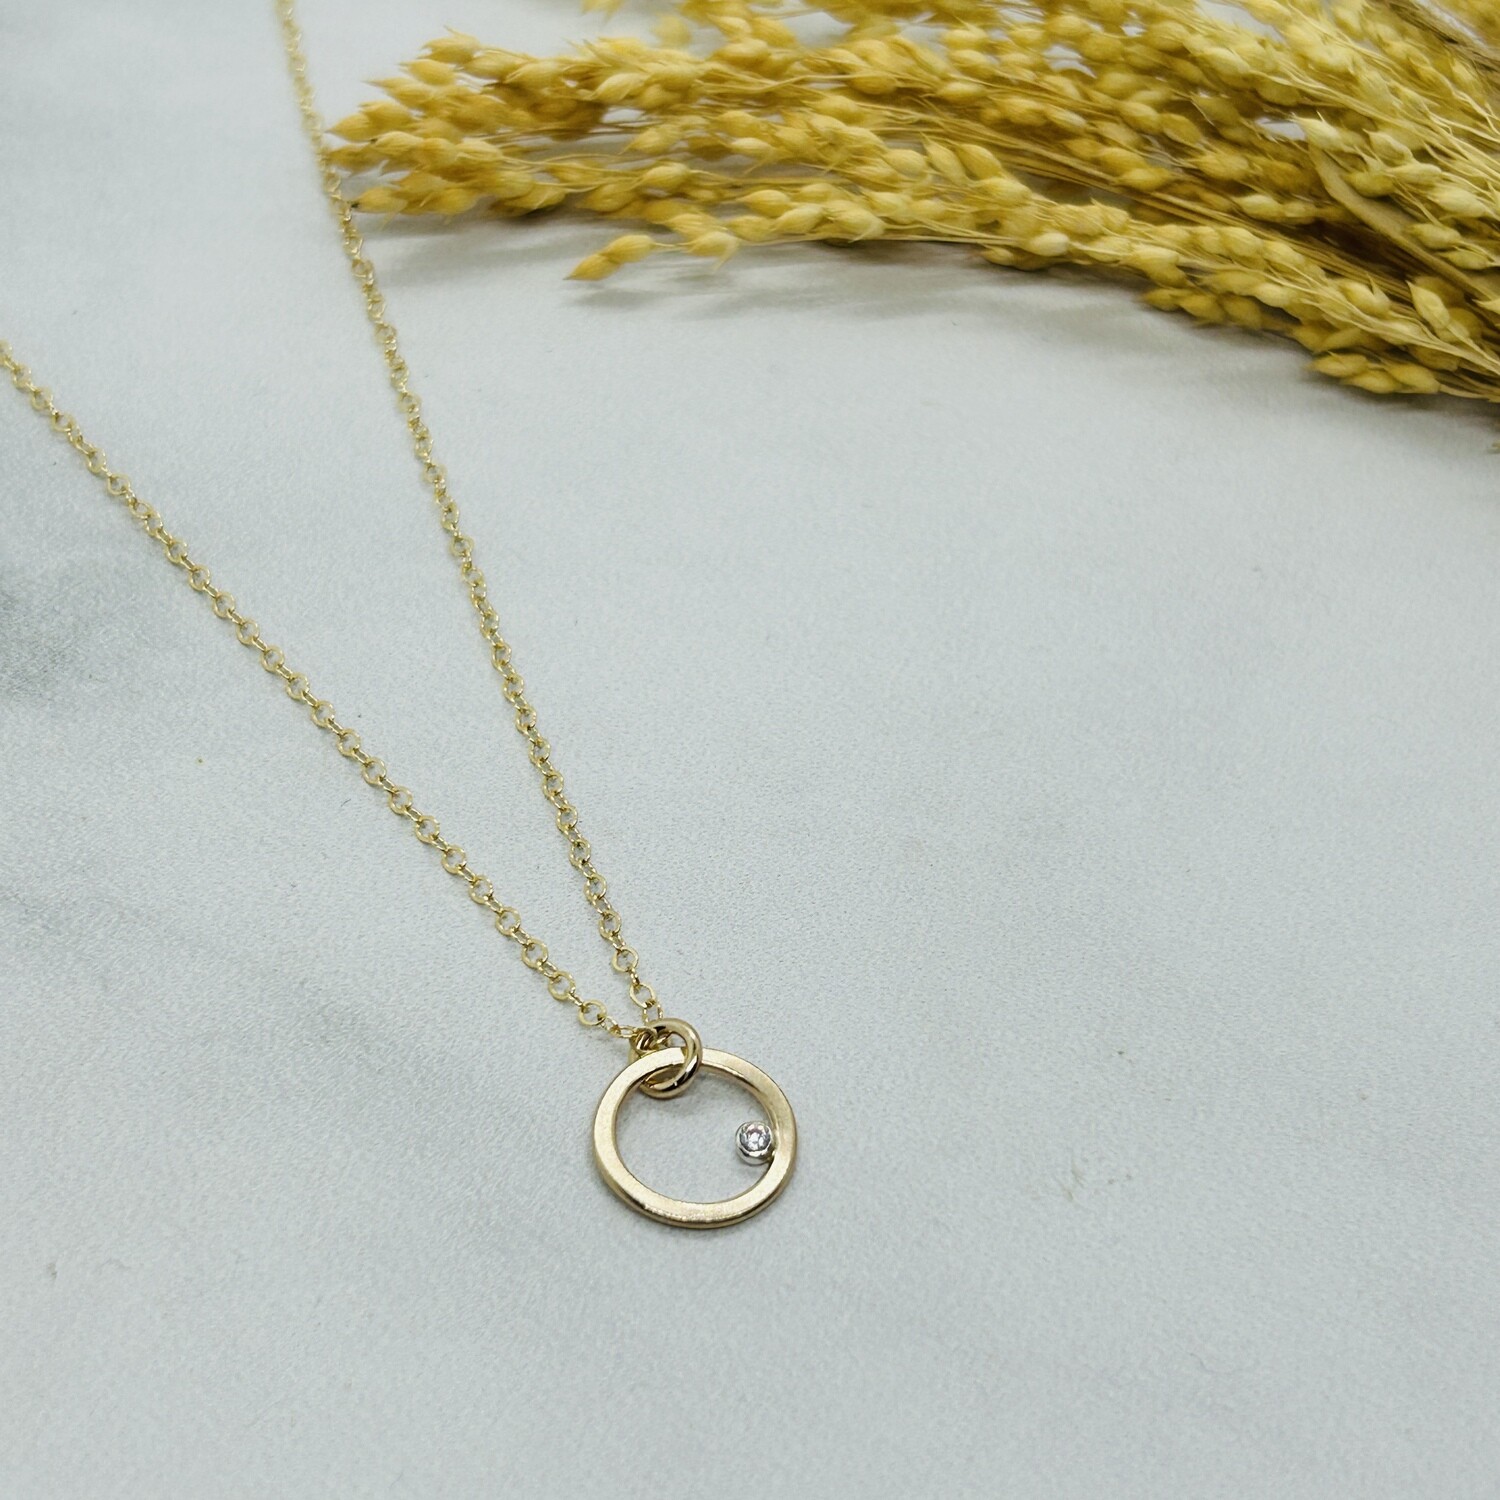 Handmade Hammered 14kt goldfill circle with 2mm faceted white cz on 14kt goldfill chain necklace – 17 inches plus 2″ adjustable extender